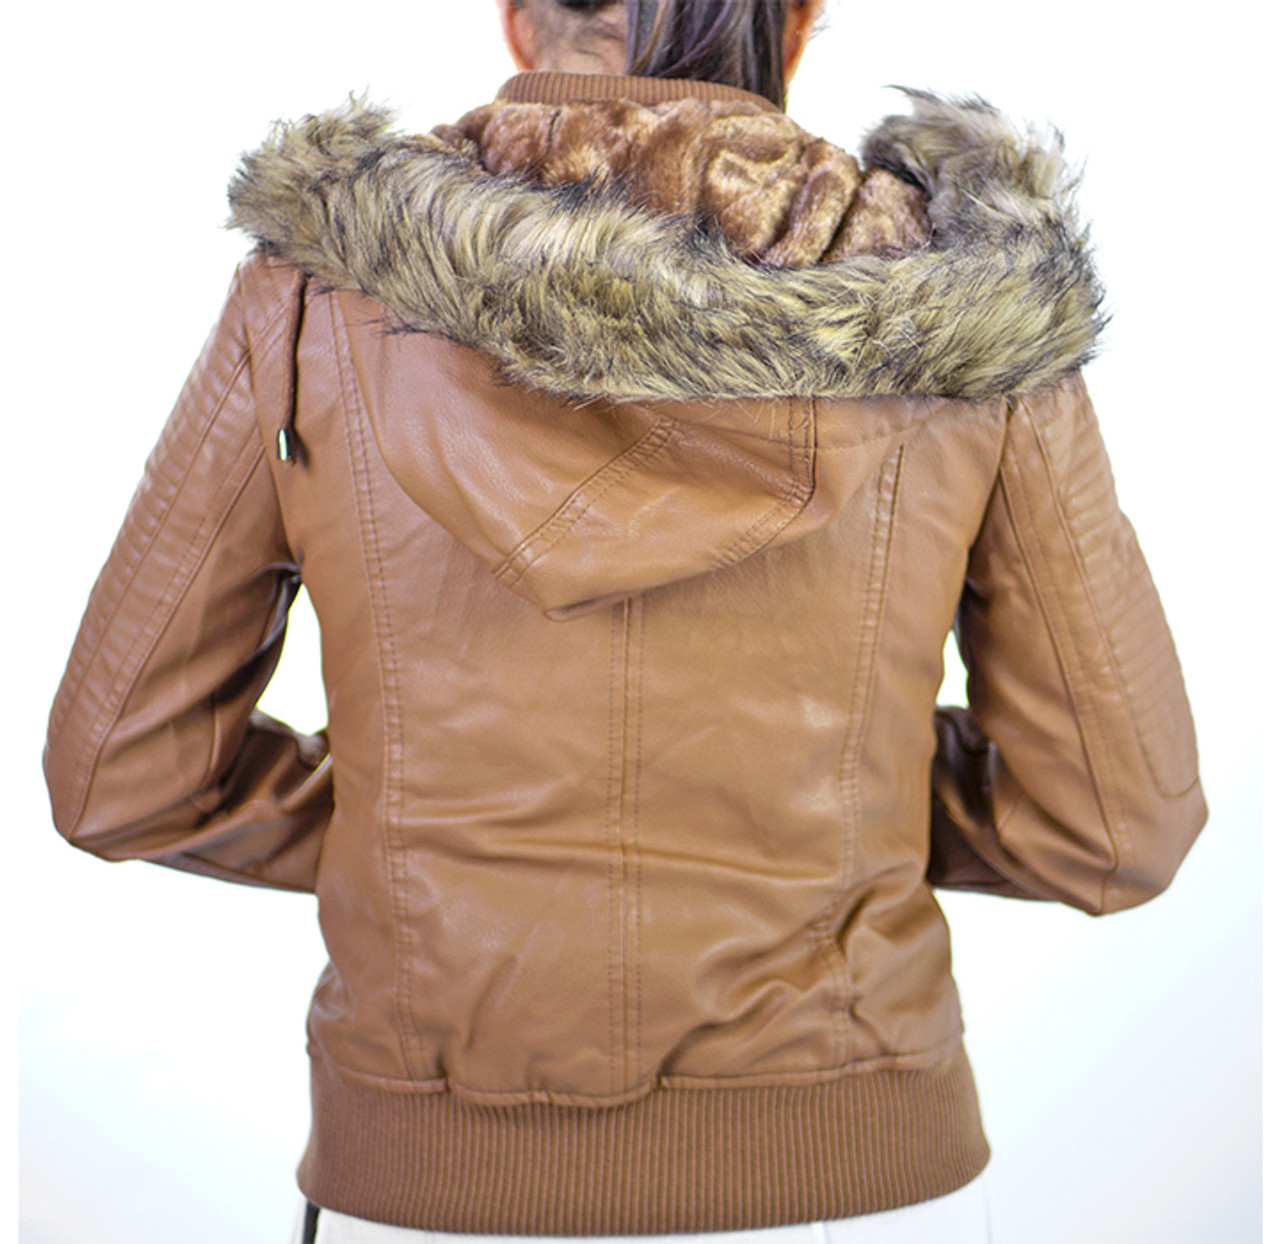 Women’s Faux Leather Motorcycle Jacket with Hood product image